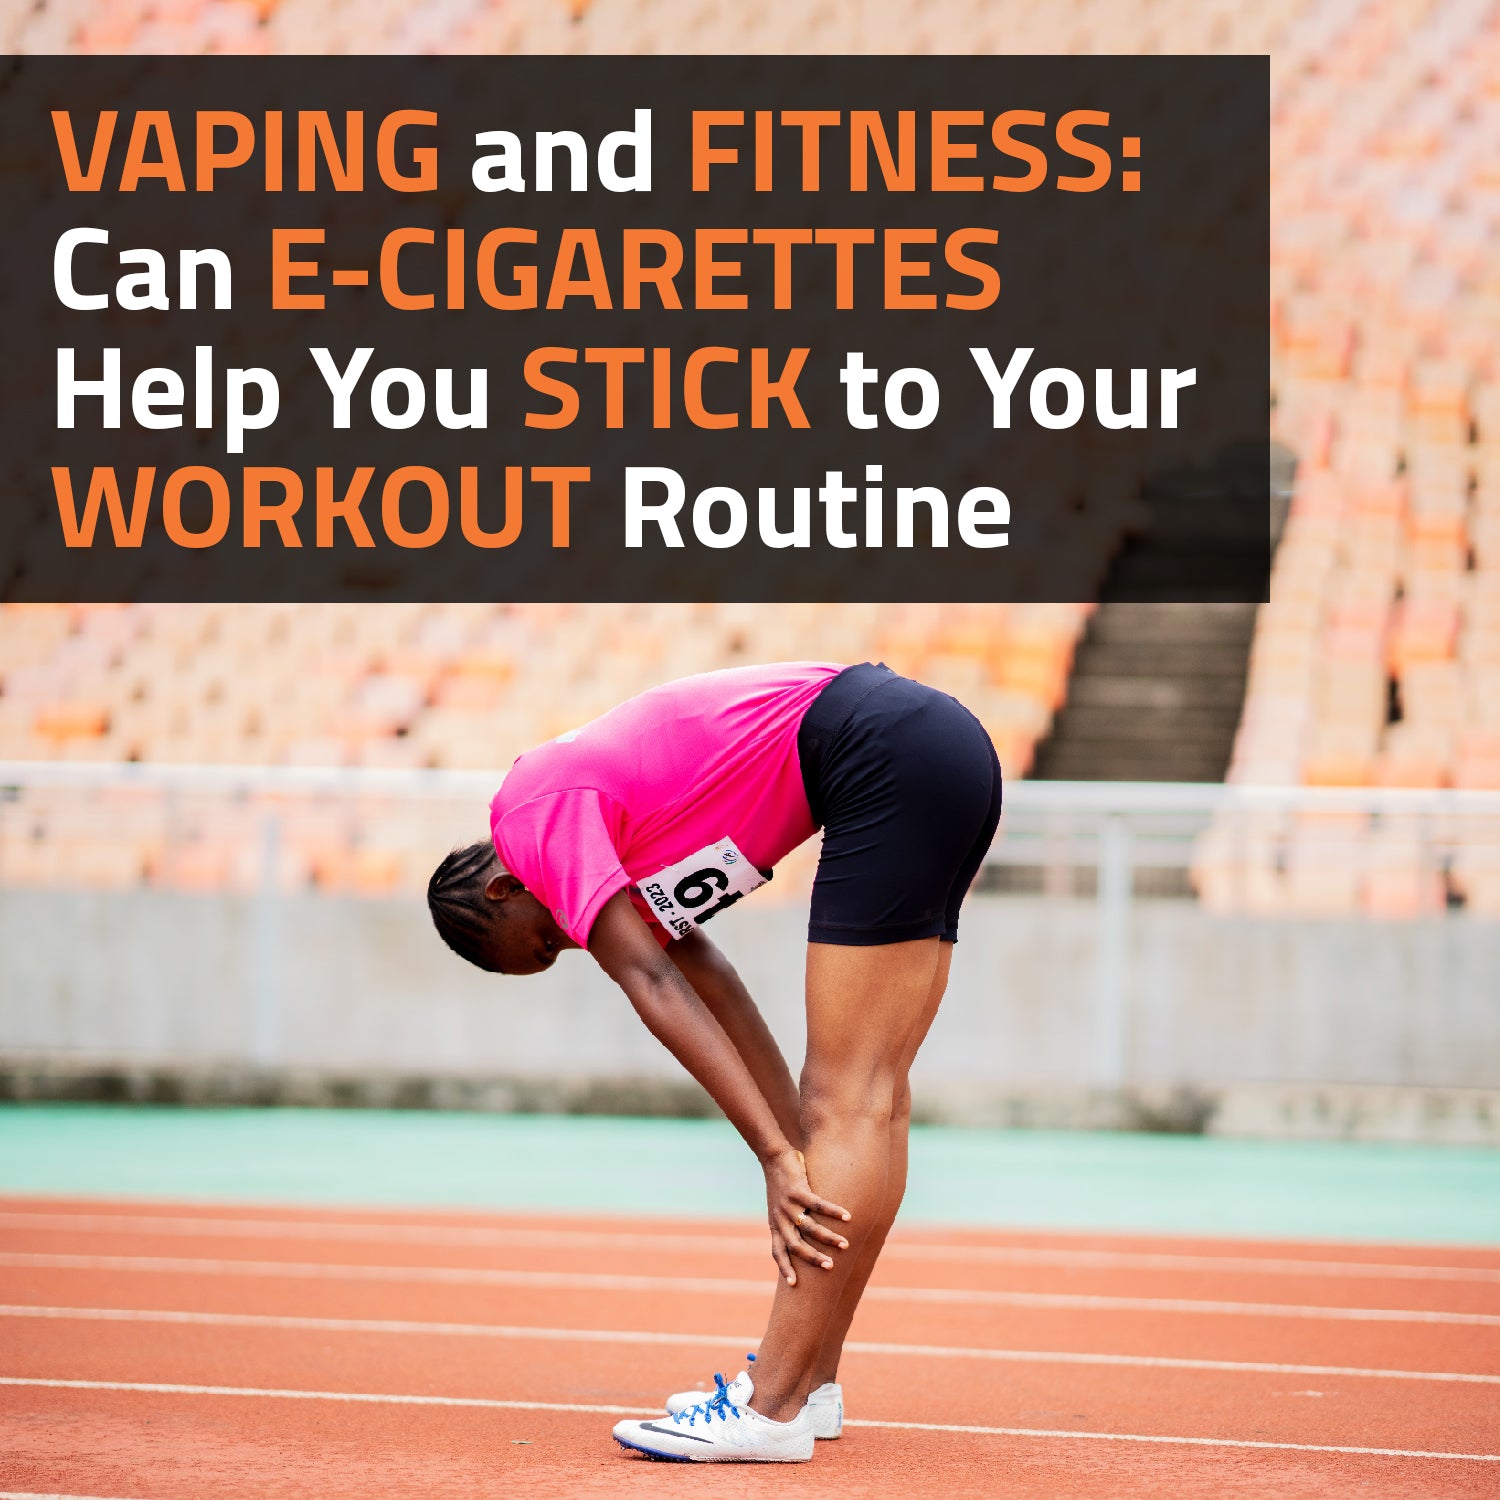 Vaping and Fitness: Striking a Balance Between Nicotine and Exercise